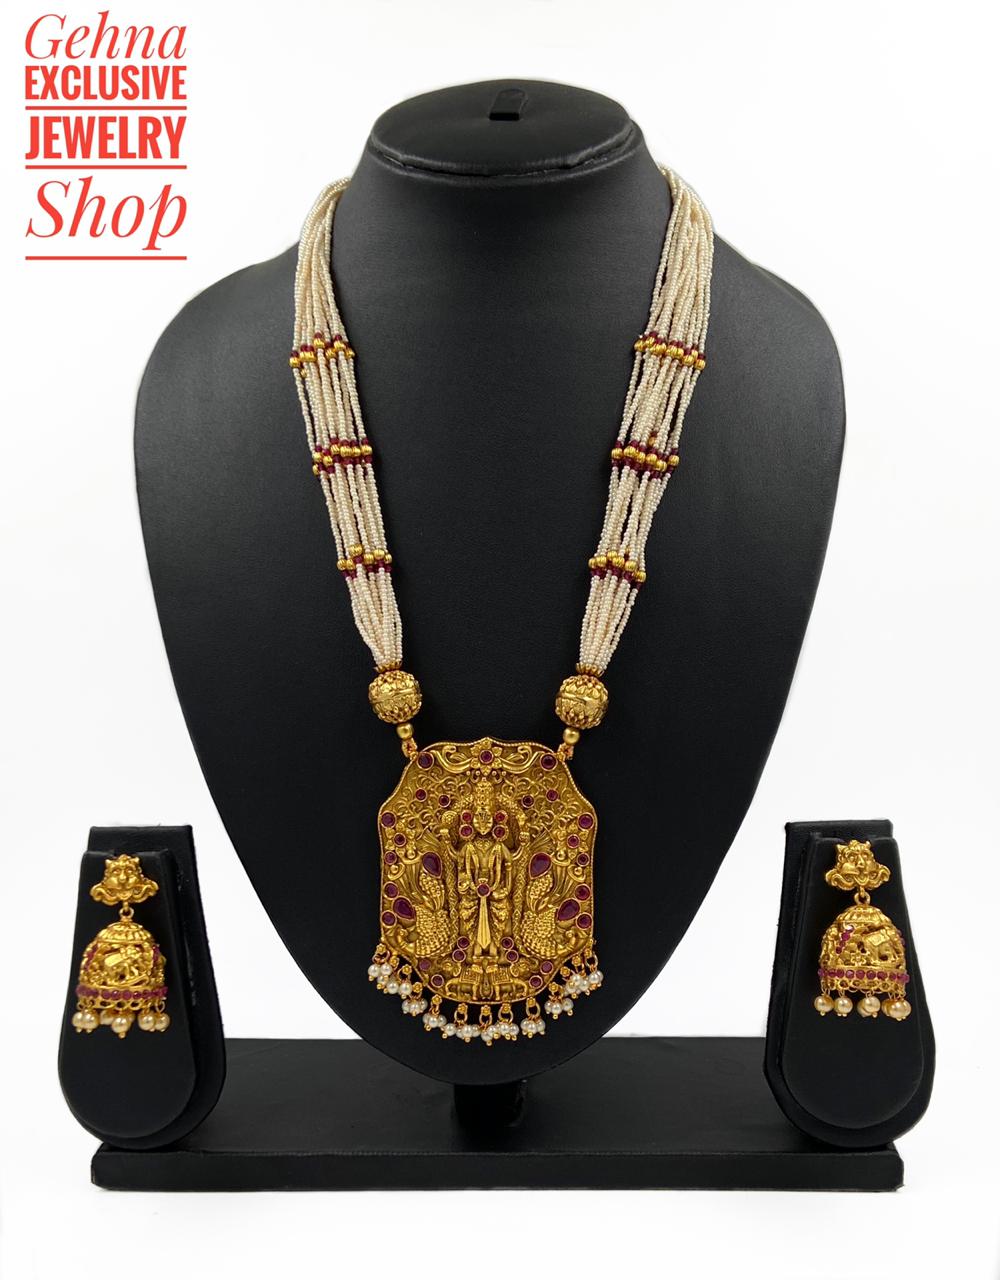 Lord Balaji Temple Necklace Set For Ladies By Gehna Shop Temple Necklace Sets